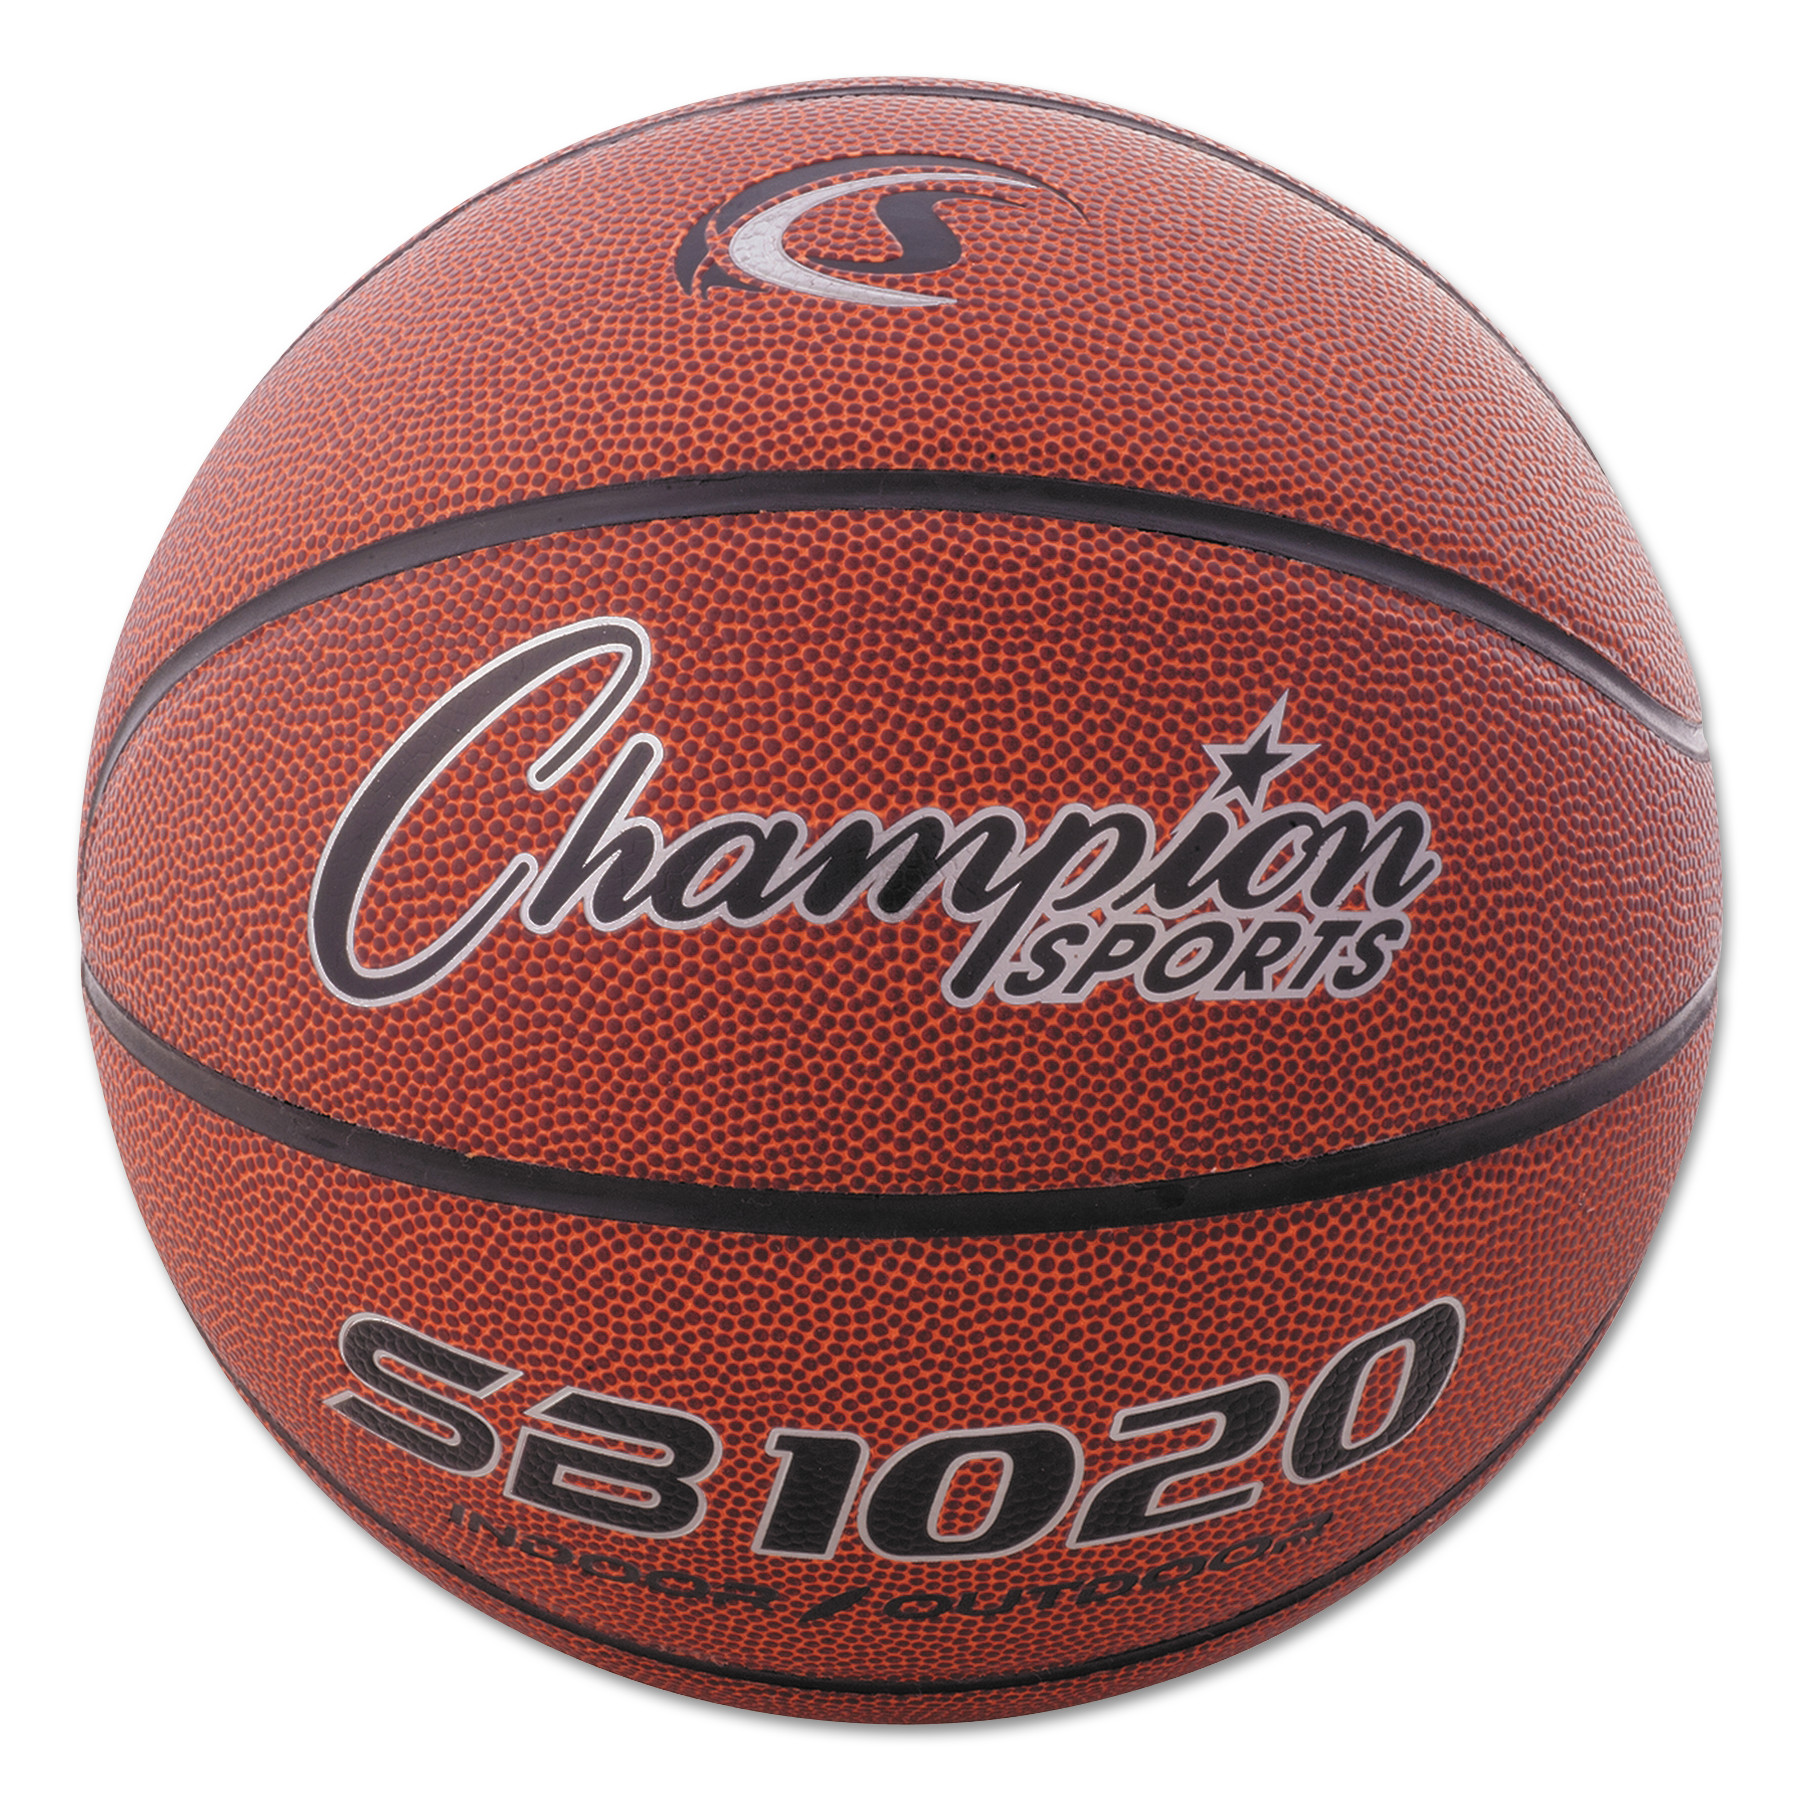 Composite Basketball, Official Size, 30", Brown